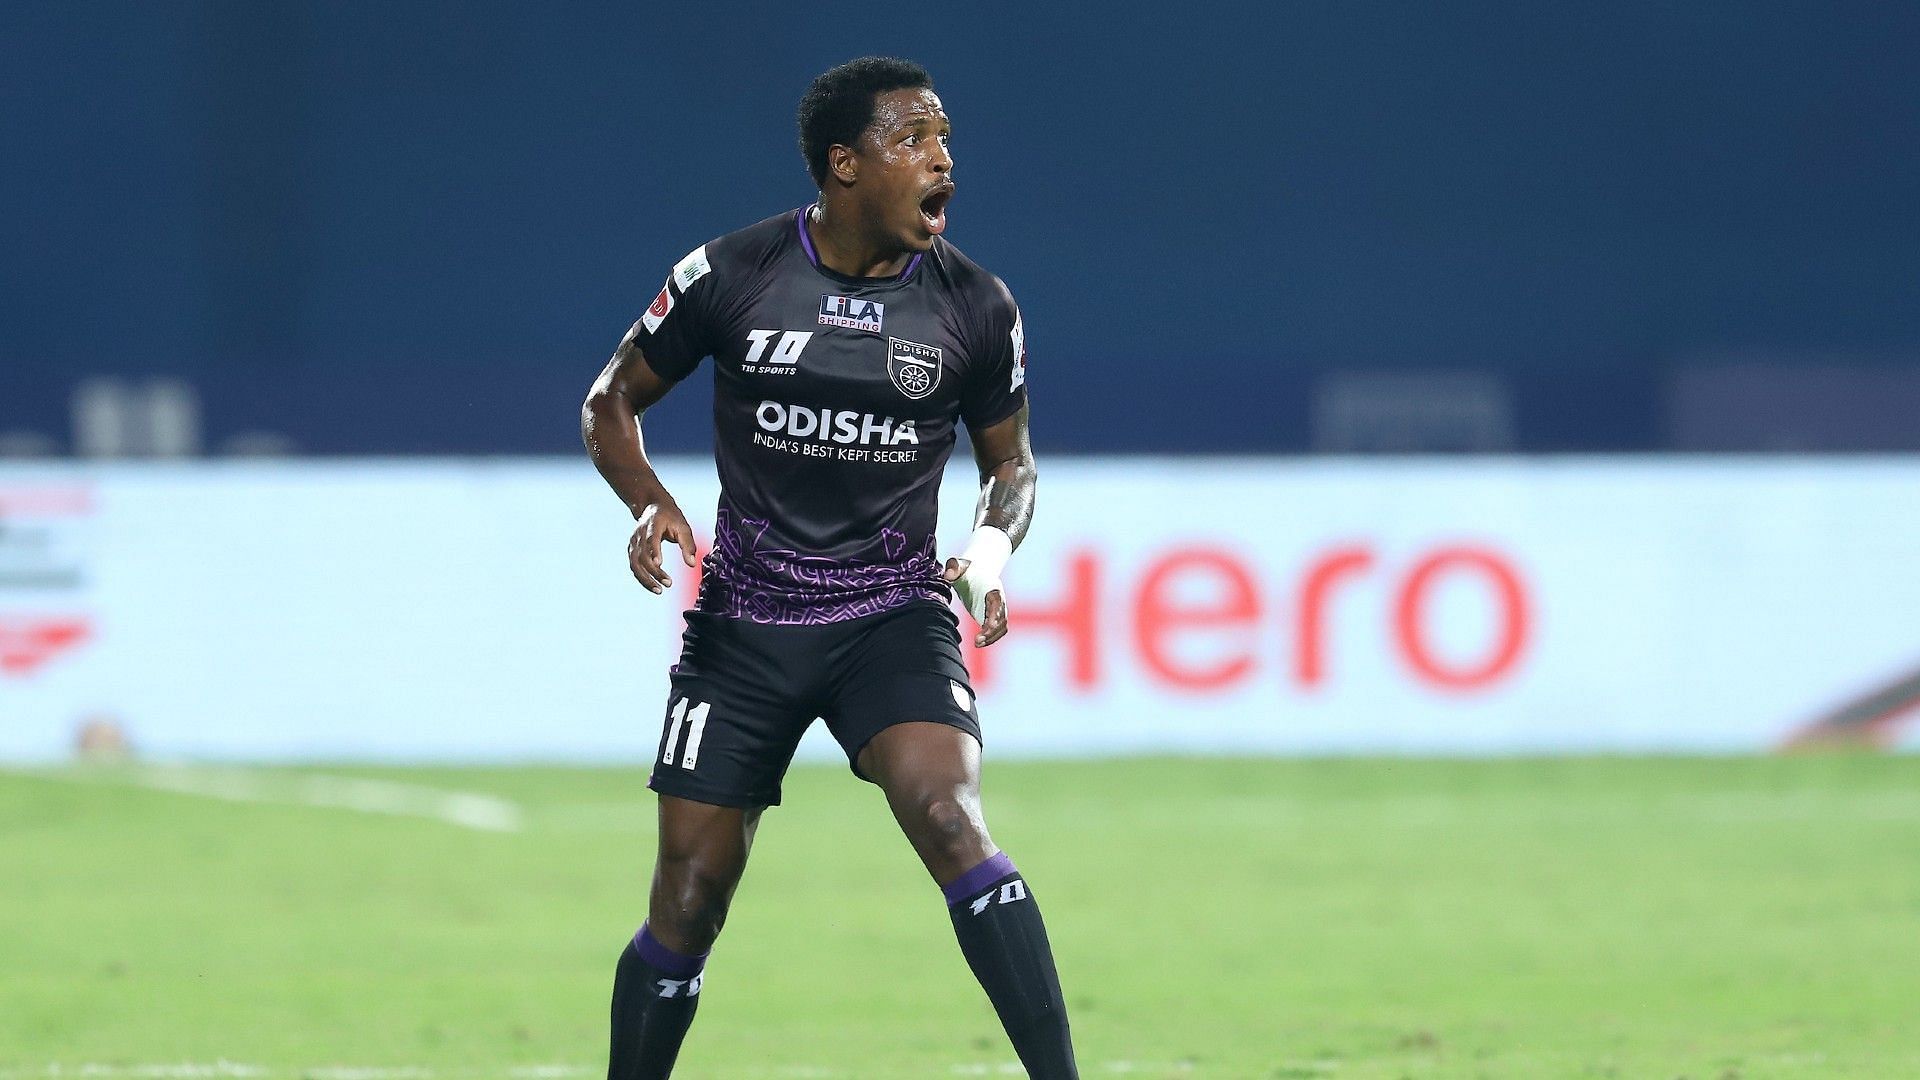 Can Odisha FC get back to winning ways in front of their home fans?